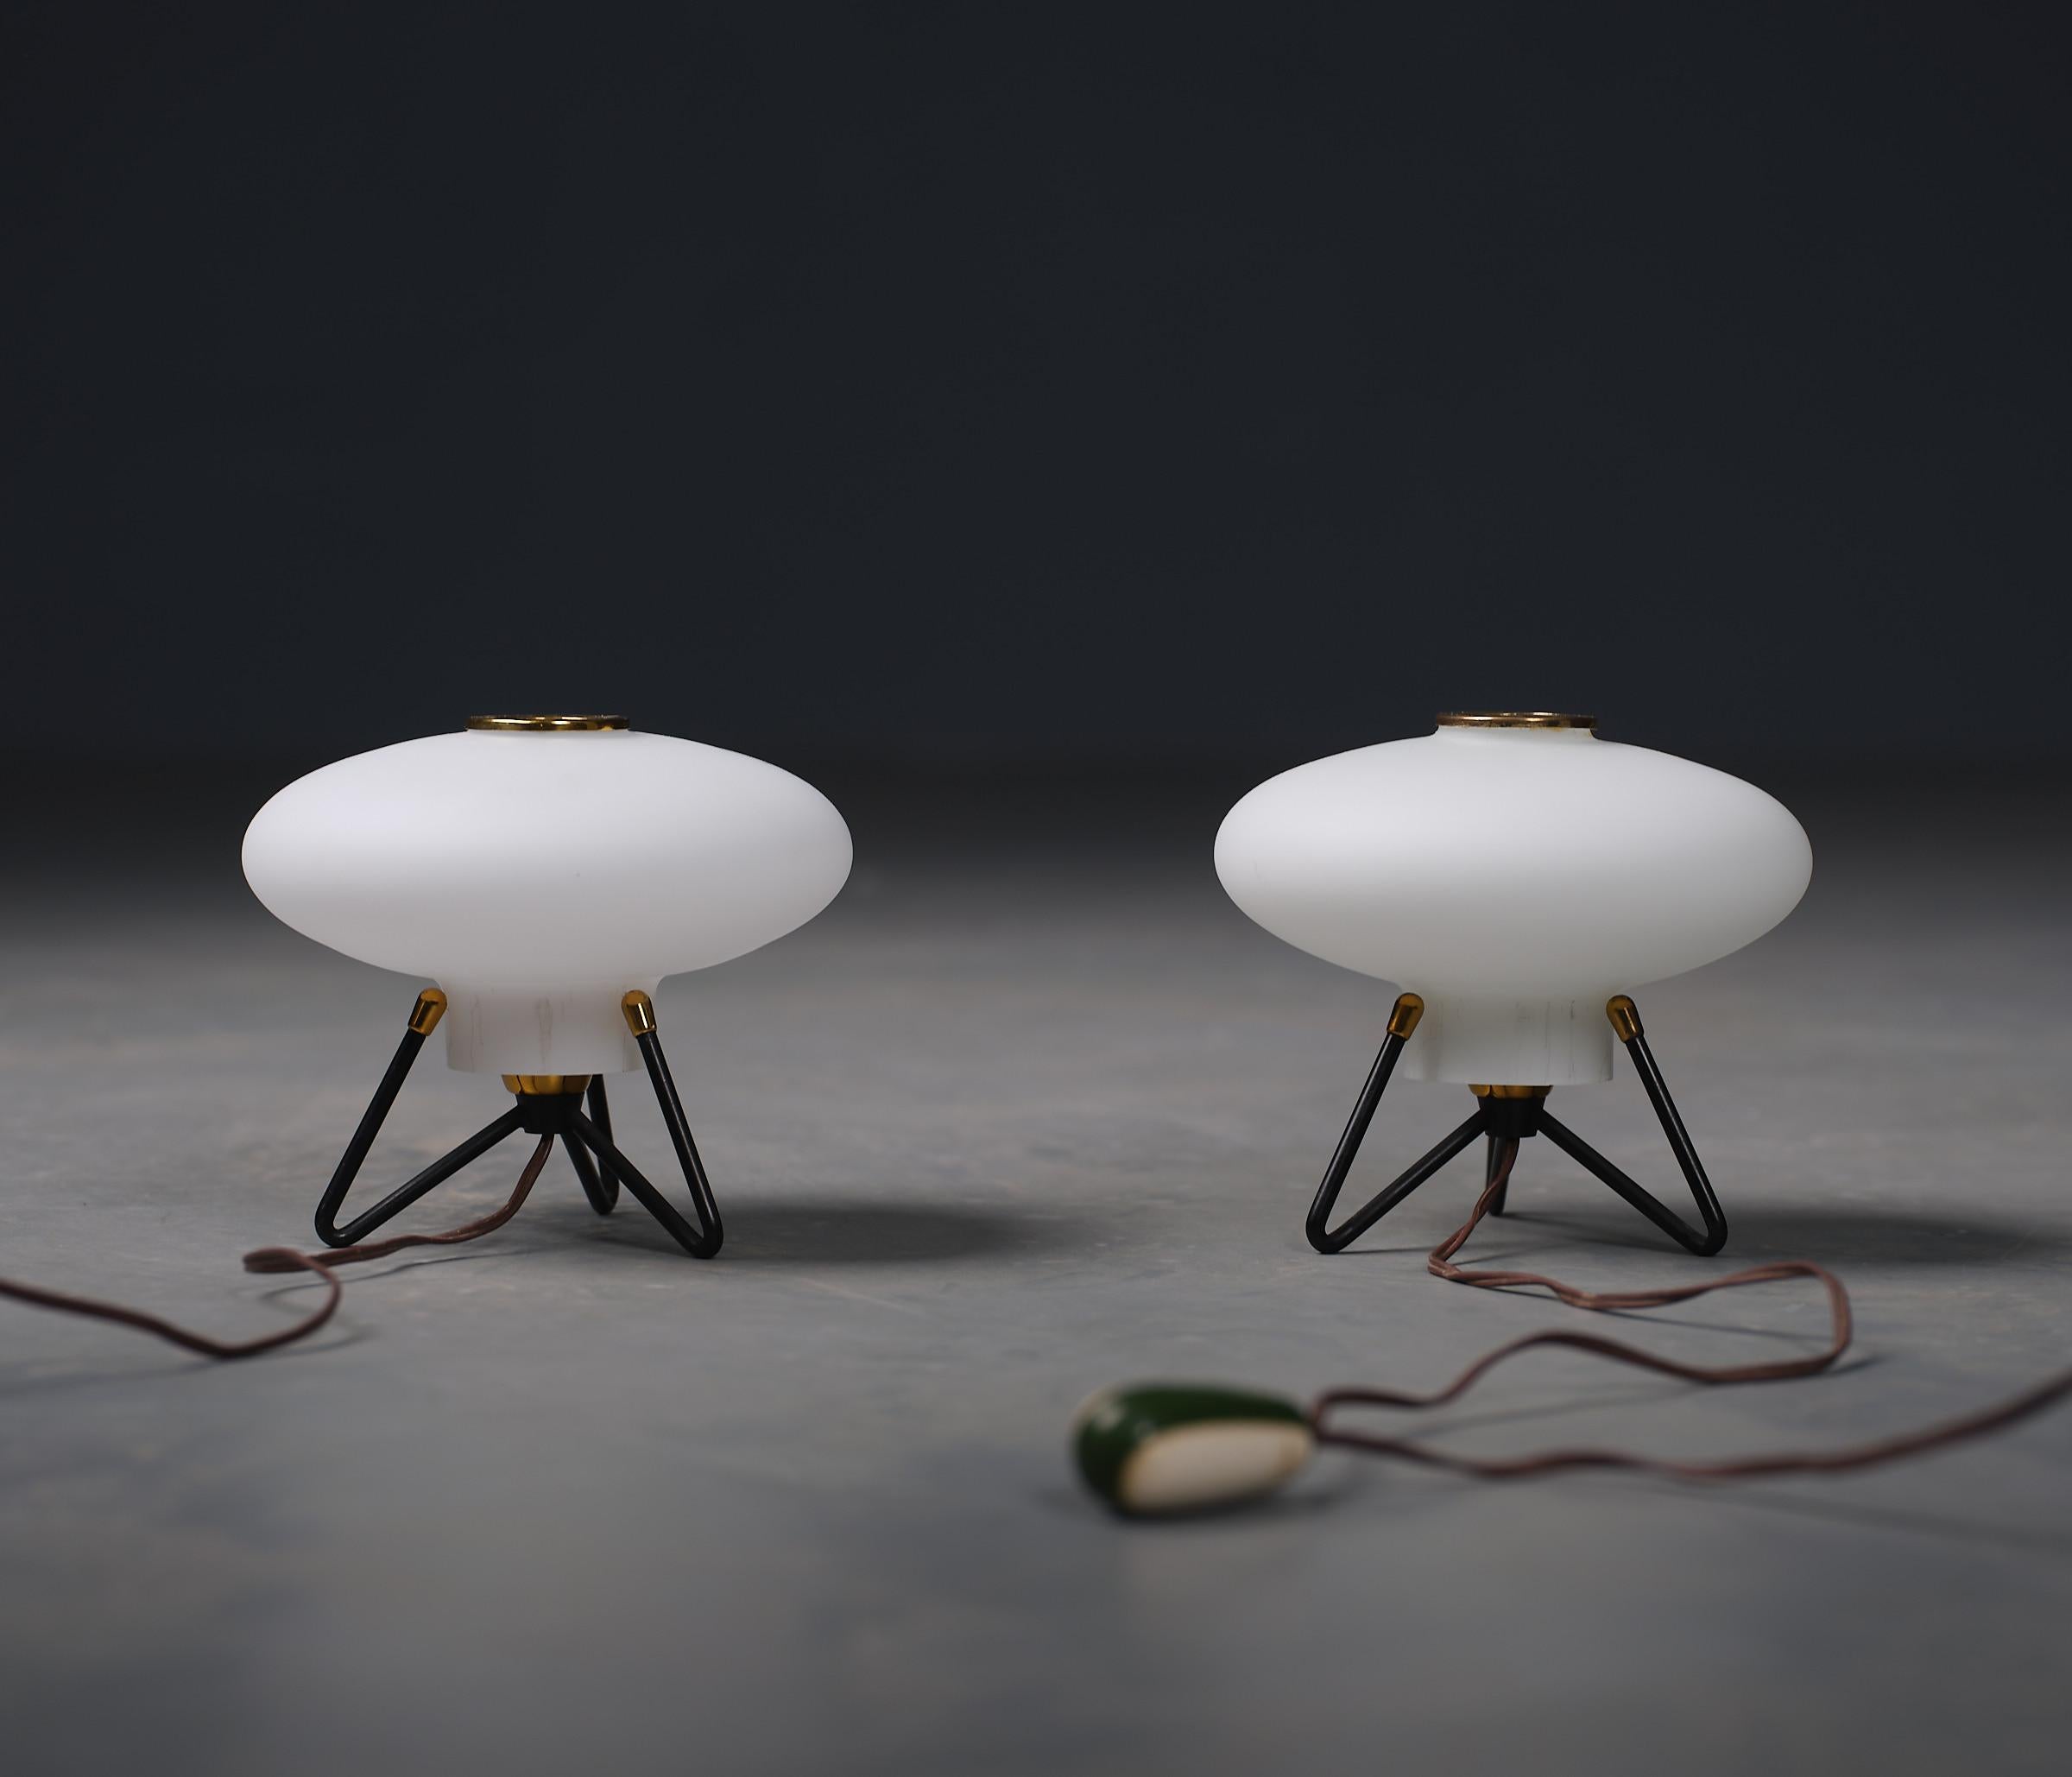 Introducing a captivating pair of table lamps that echo the futuristic themes of the 1950s, attributed to the design ethos of STILNOVO. These lamps are beautifully preserved, showcasing only minimal signs of wear which lend authentic vintage appeal